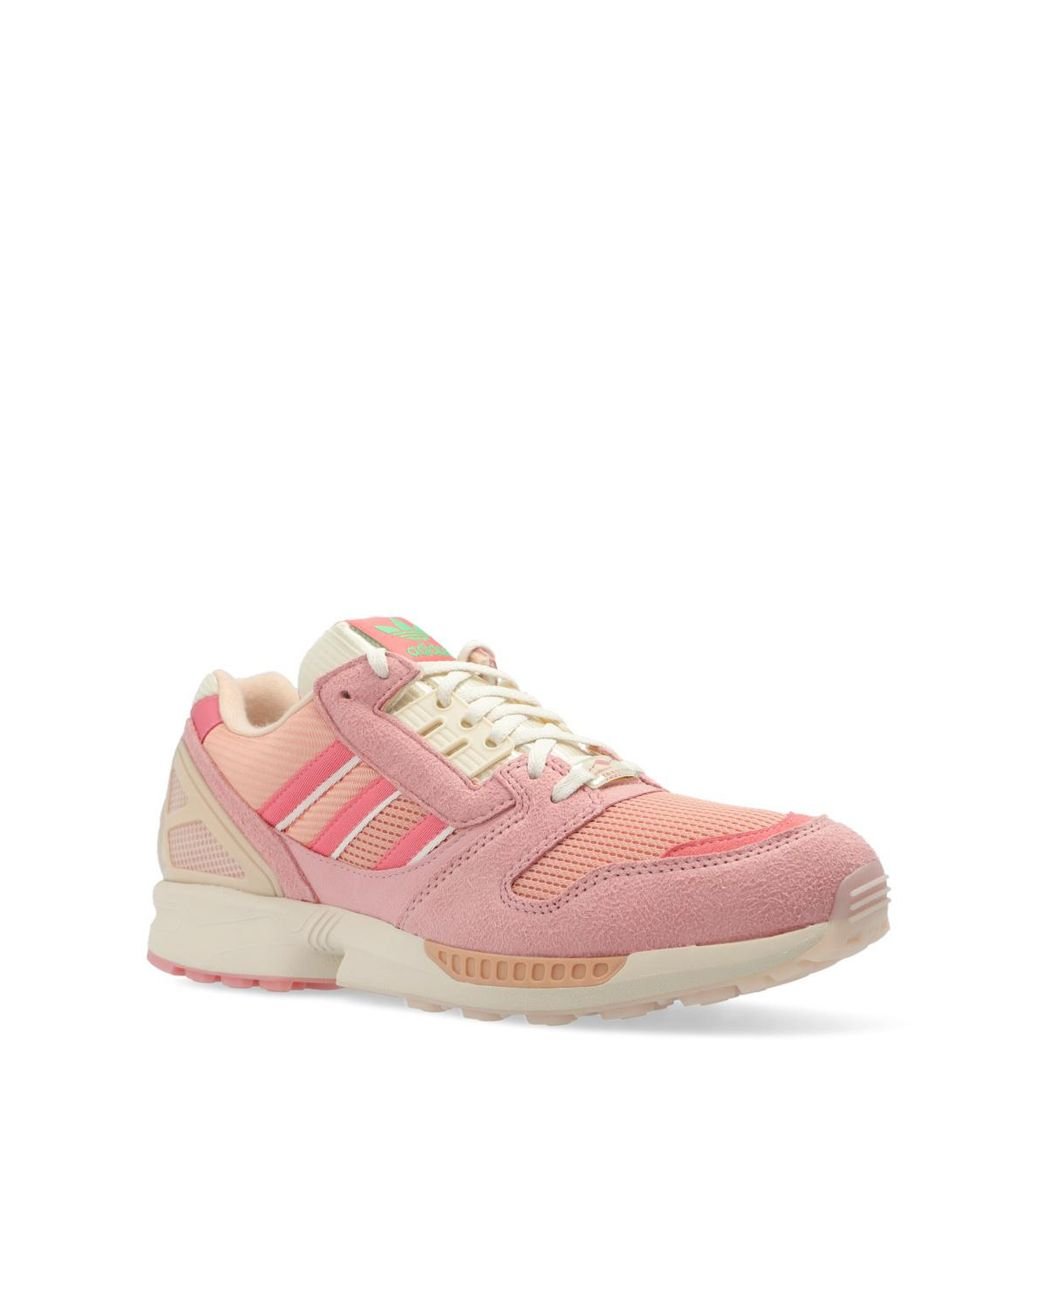 adidas Originals 'zx 8000 Strawberry Latte' Sneakers in Pink for 